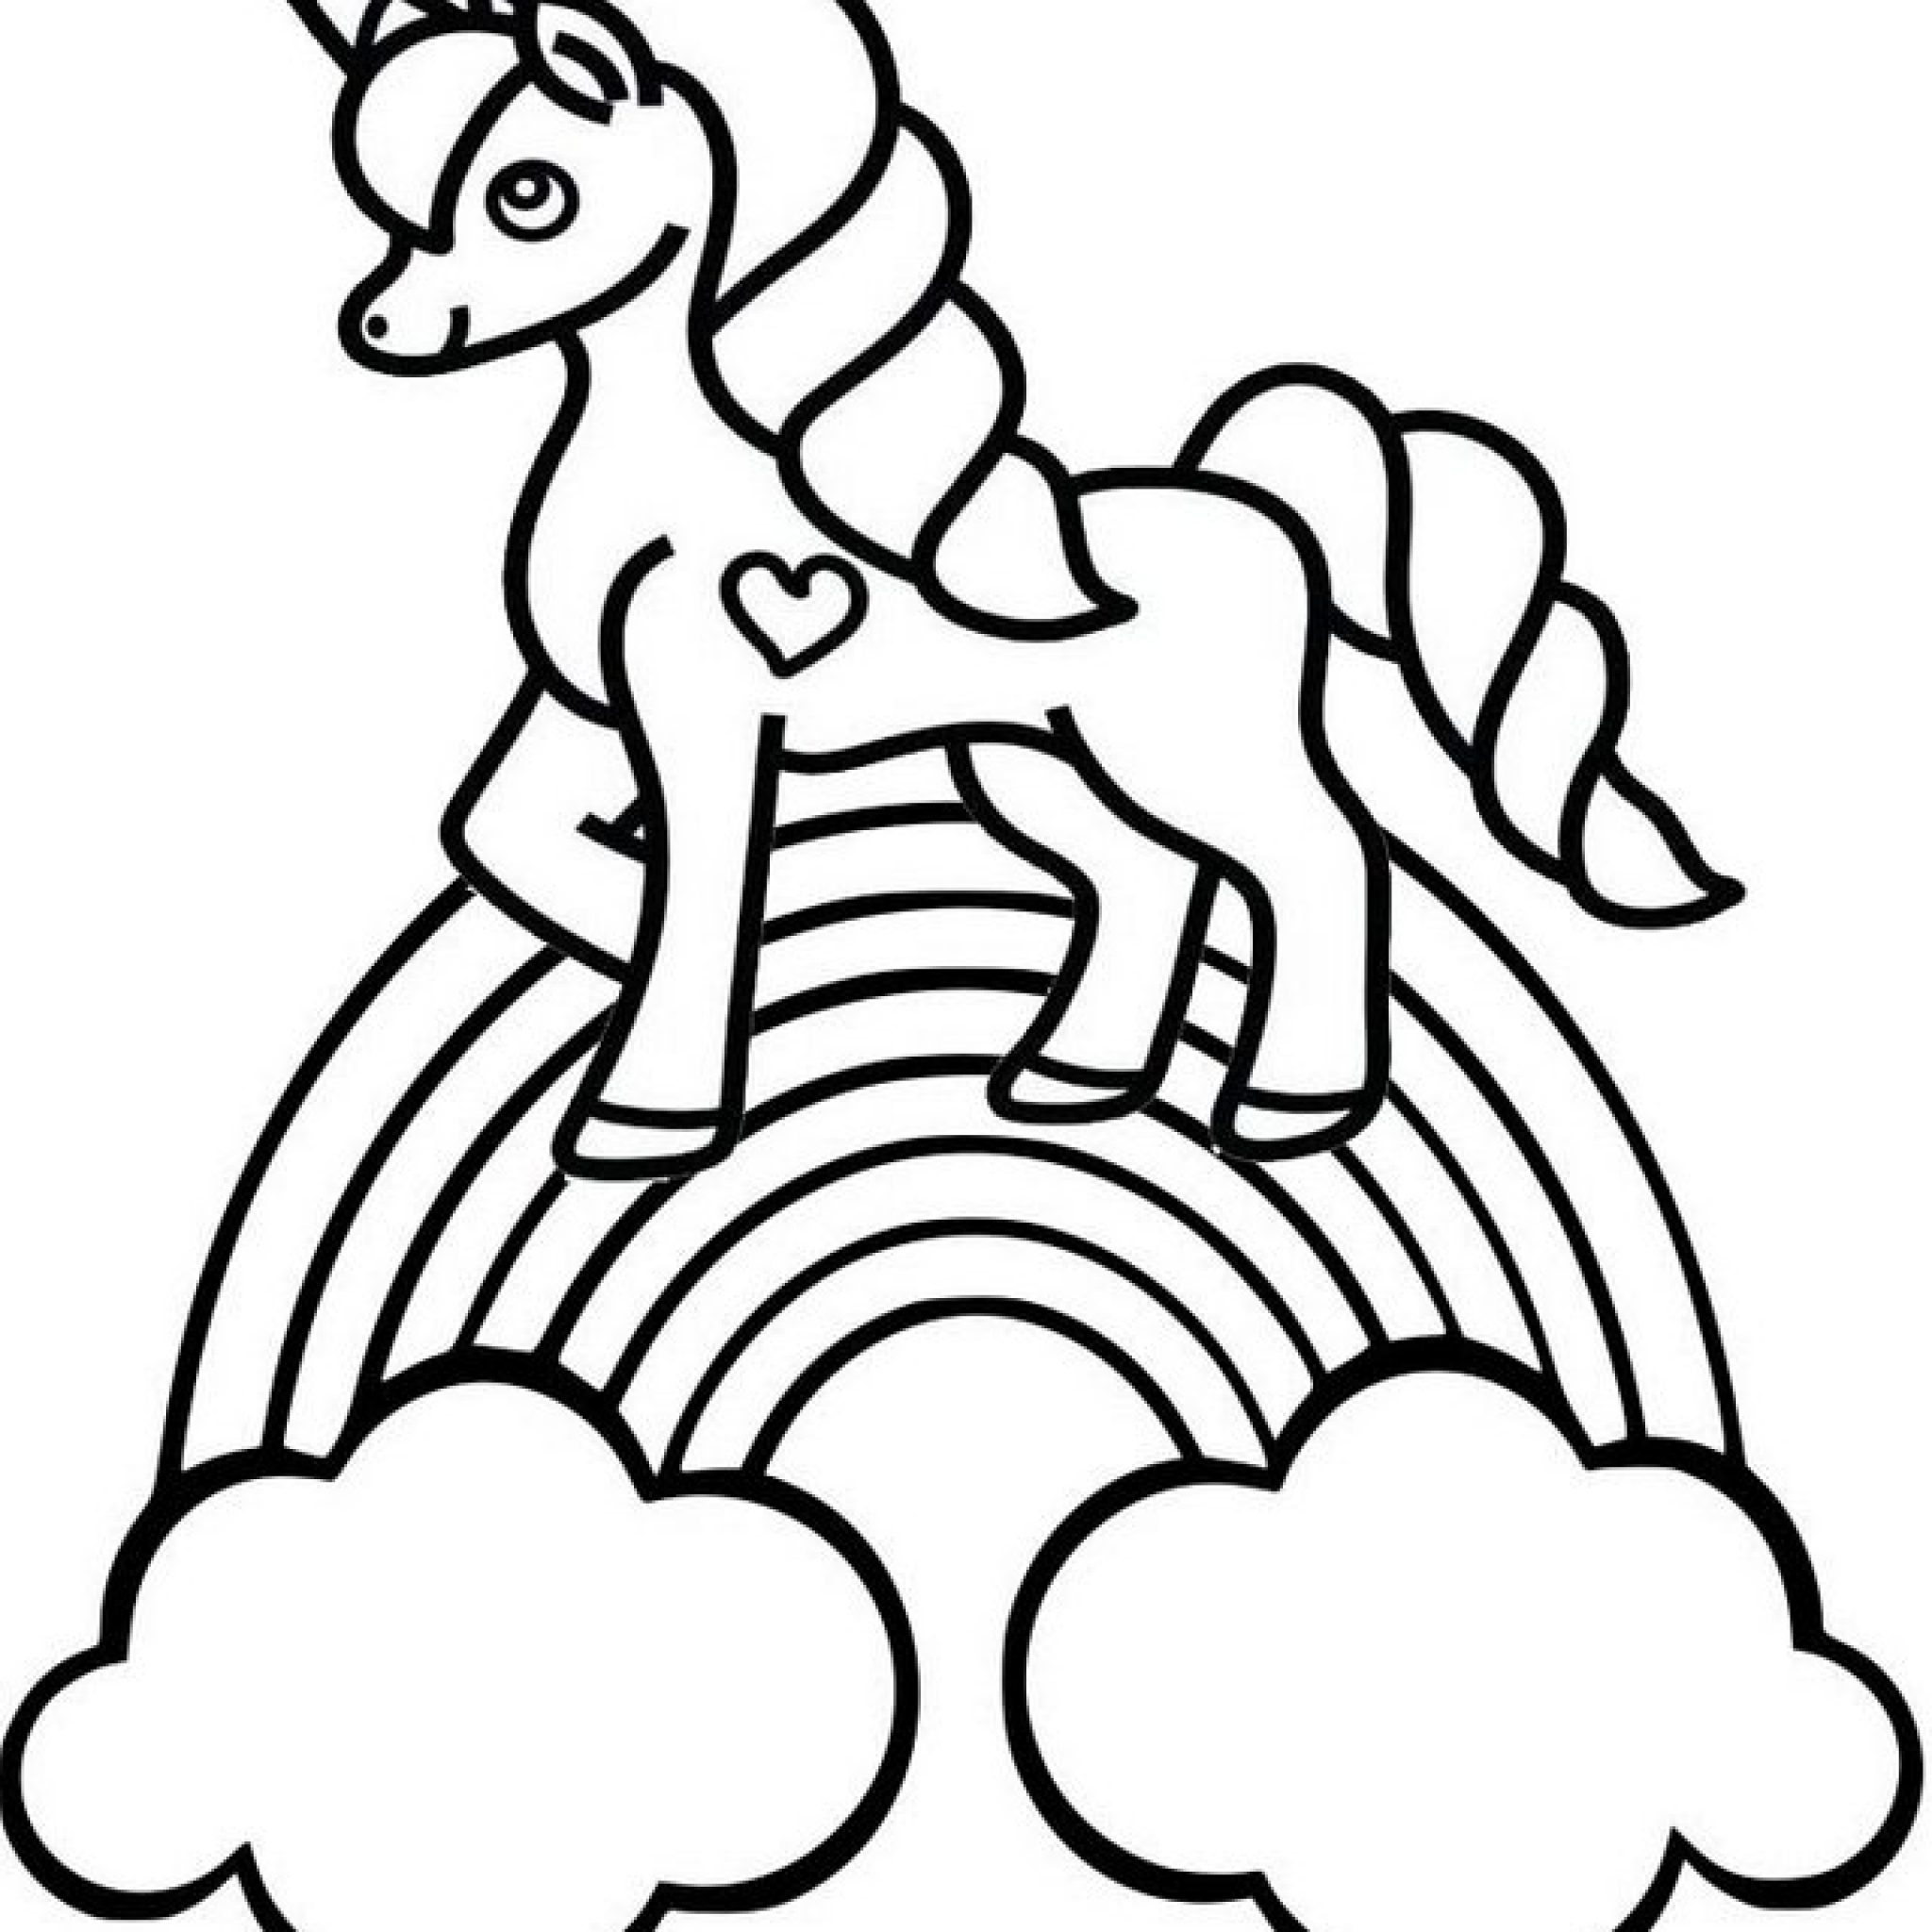 The Gorgeous 15 Minute Unicorn Coloring Page For Kids - Mitraland